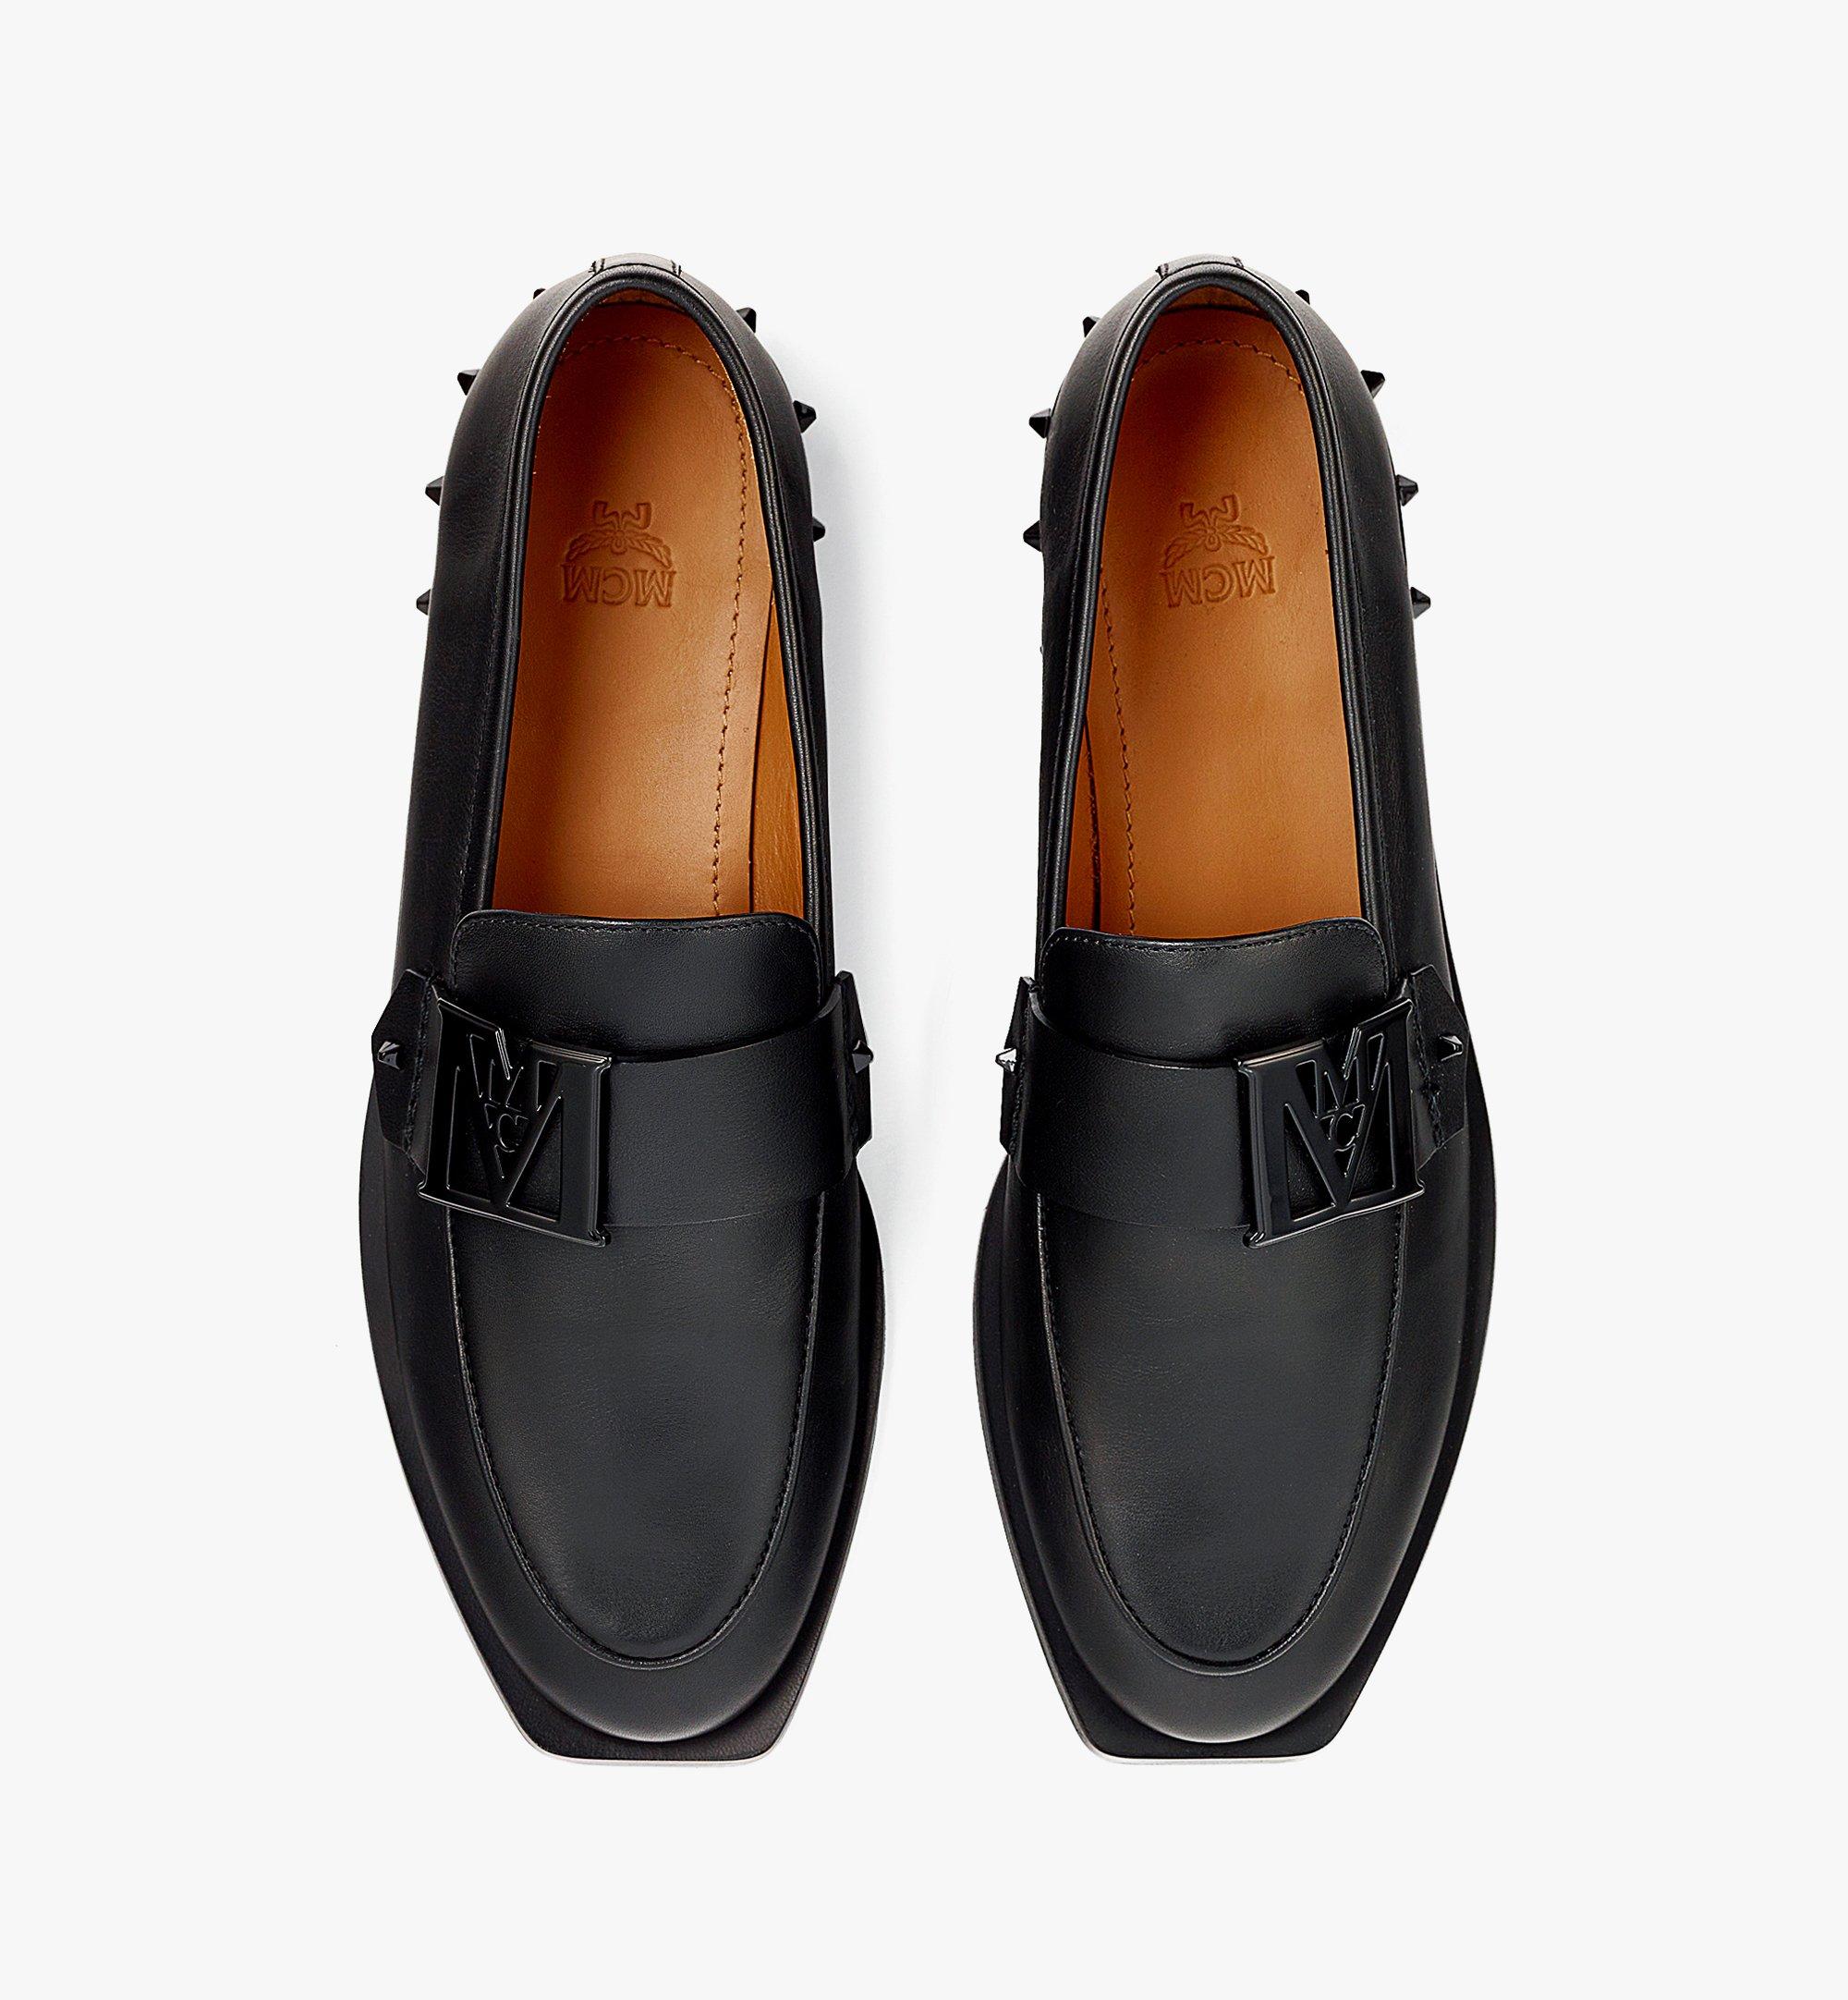 37 IT Women’s Travia Loafer in Calf Leather Black | MCM ®TH